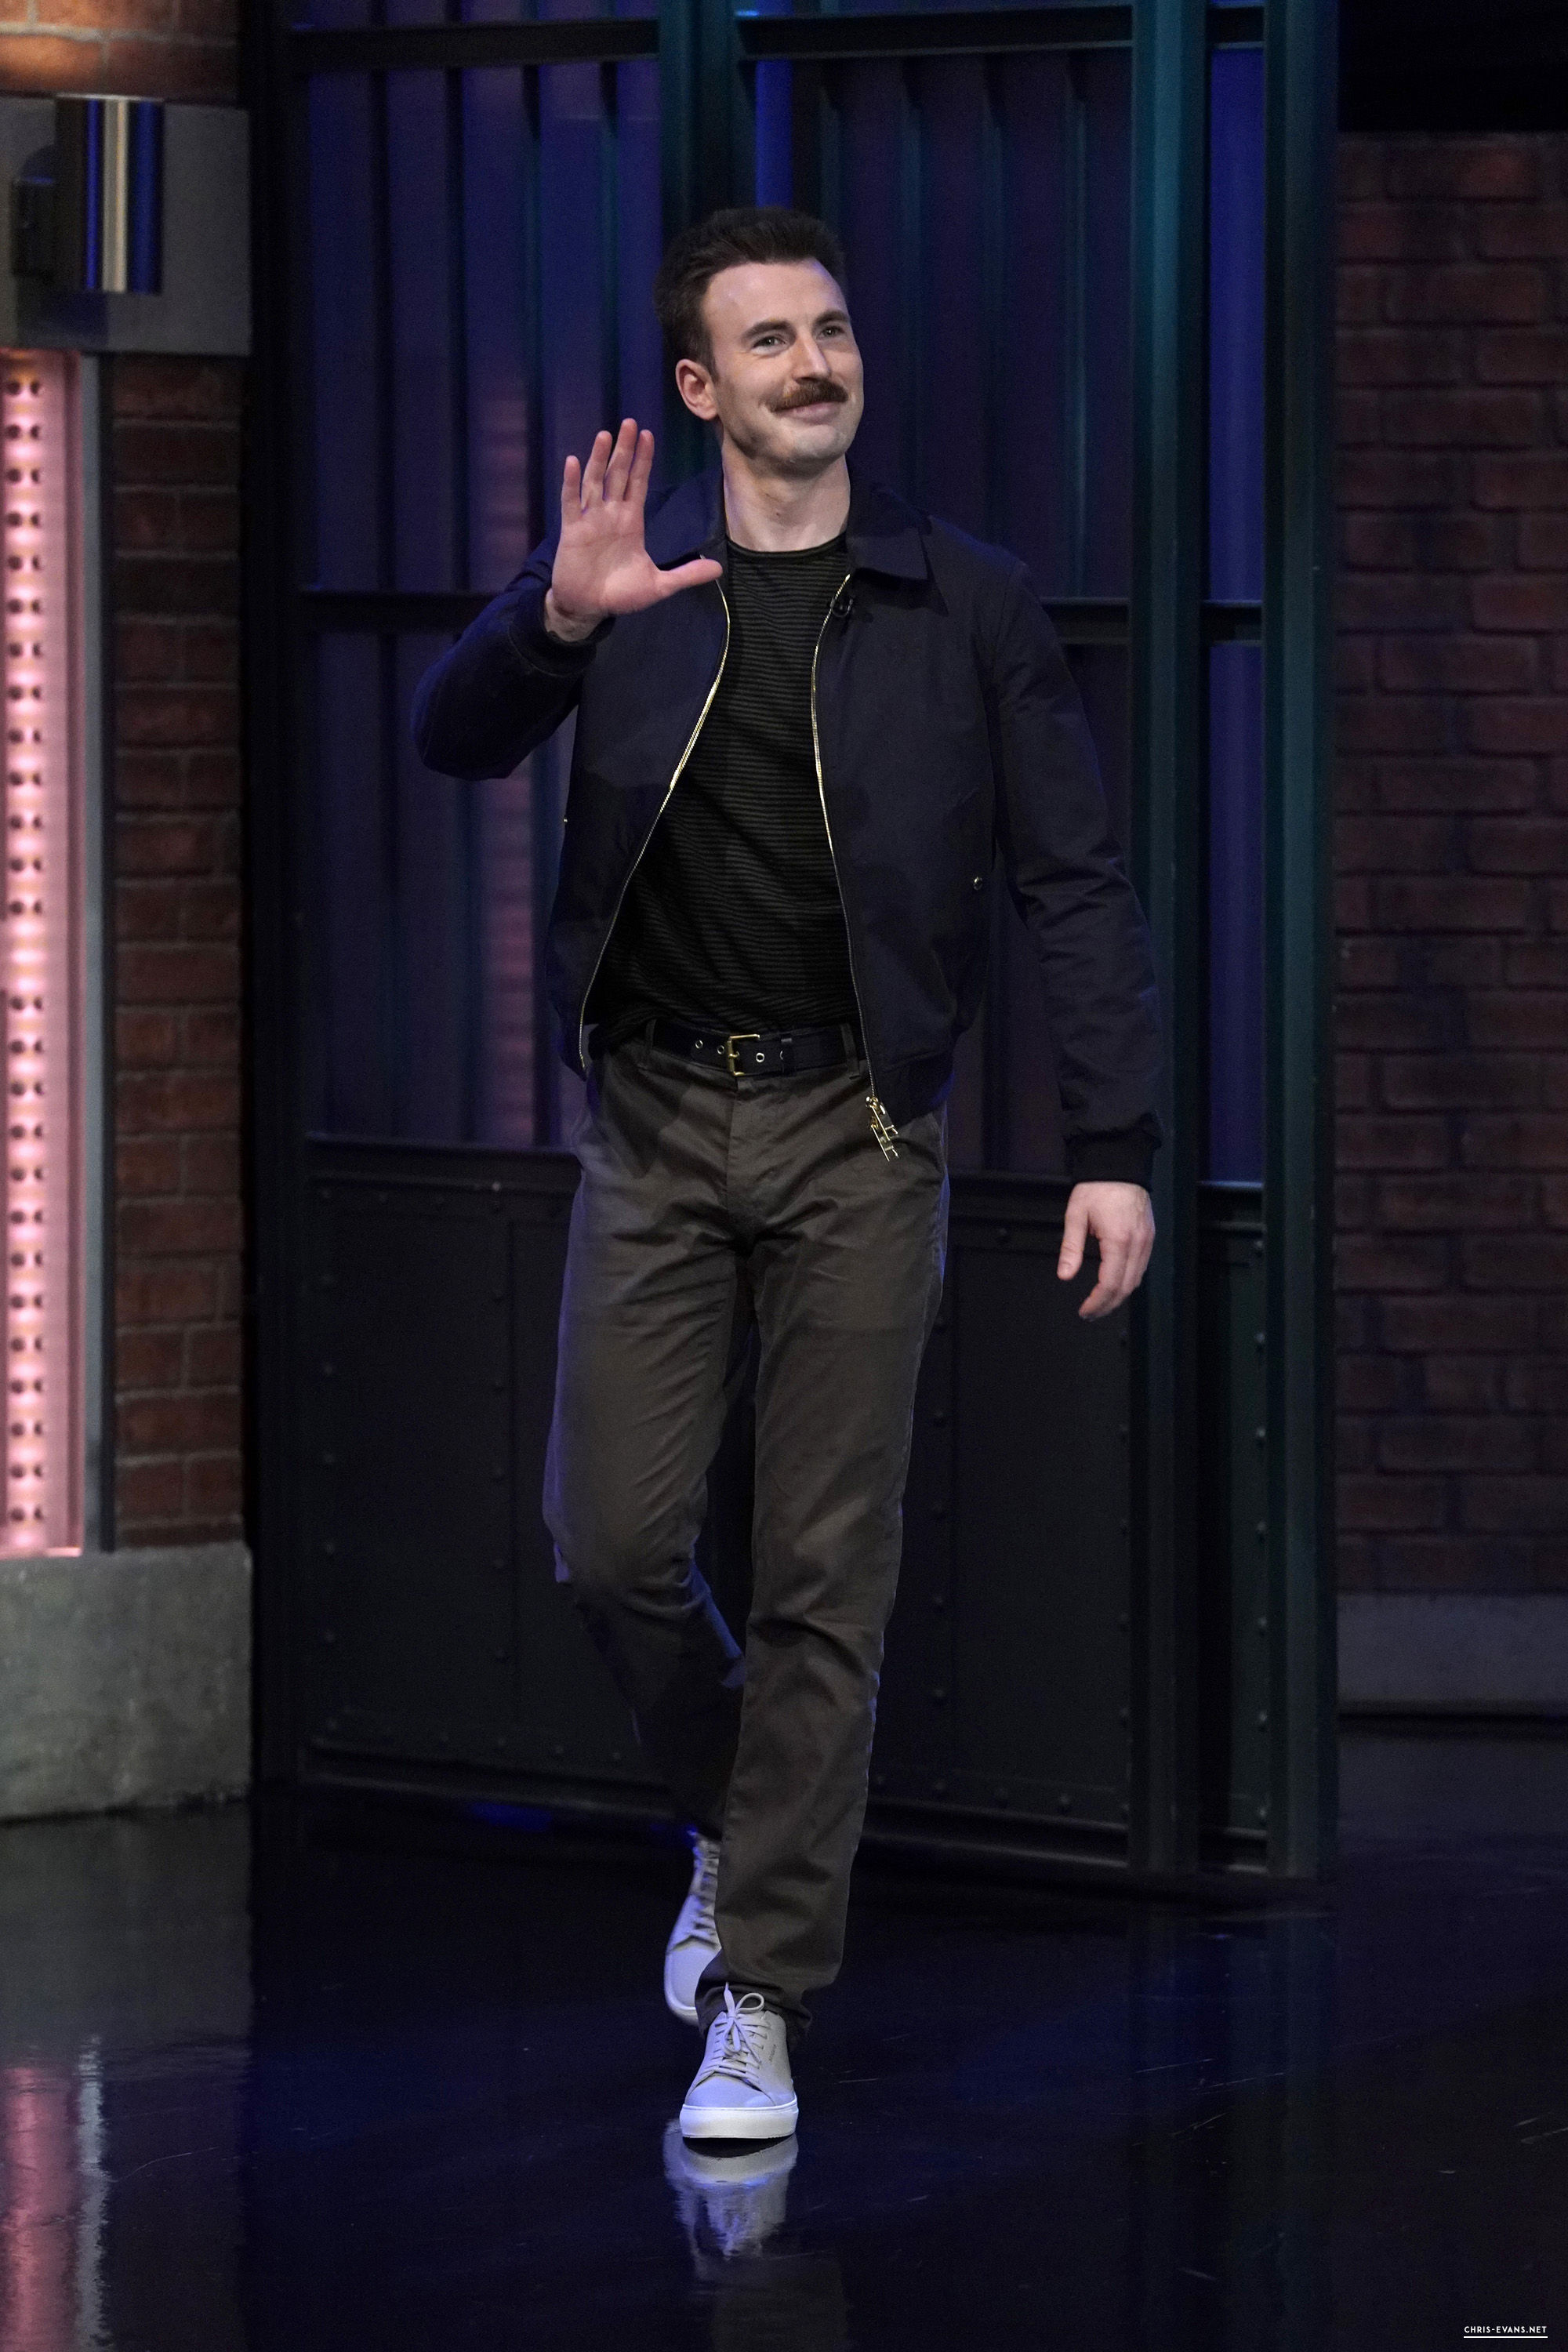 http://chris-evans.net/photos/albums/Appearances/2018/04%2023%20Late%20Night%20with%20Seth%20Meyers/001.jpg